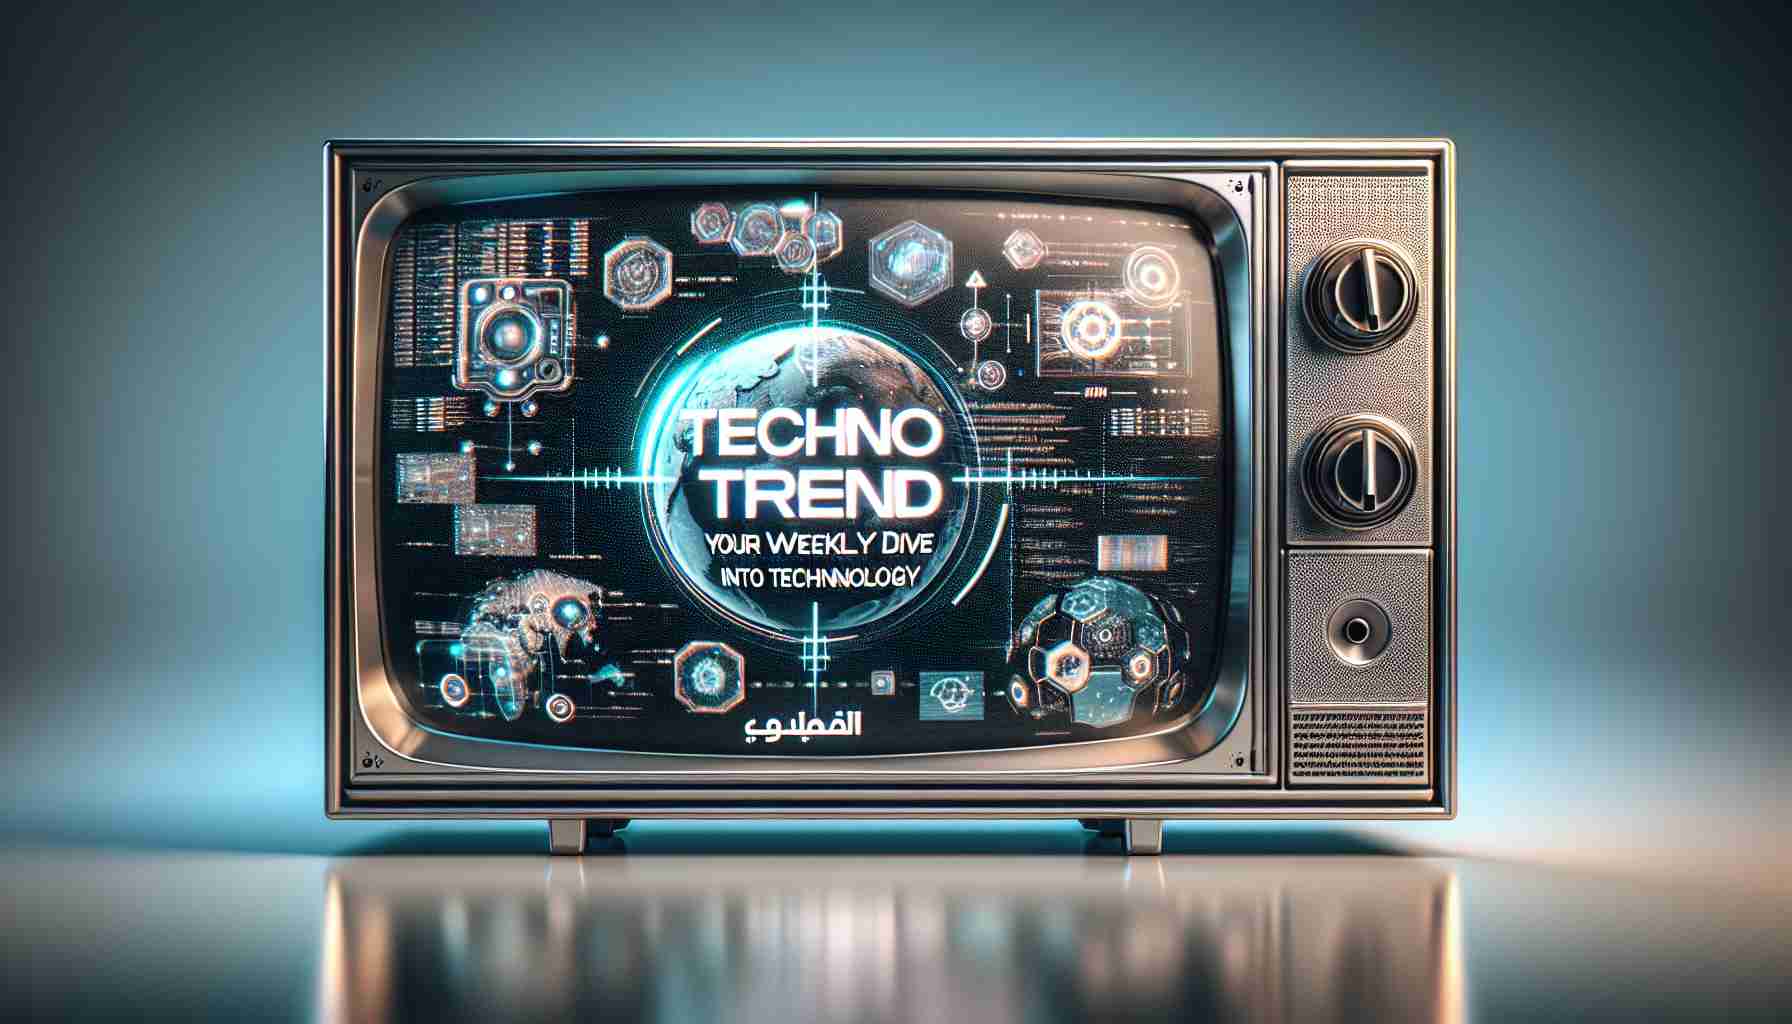 Techno Trend: Your Weekly Dive into Technology on Sama Dubai Channel